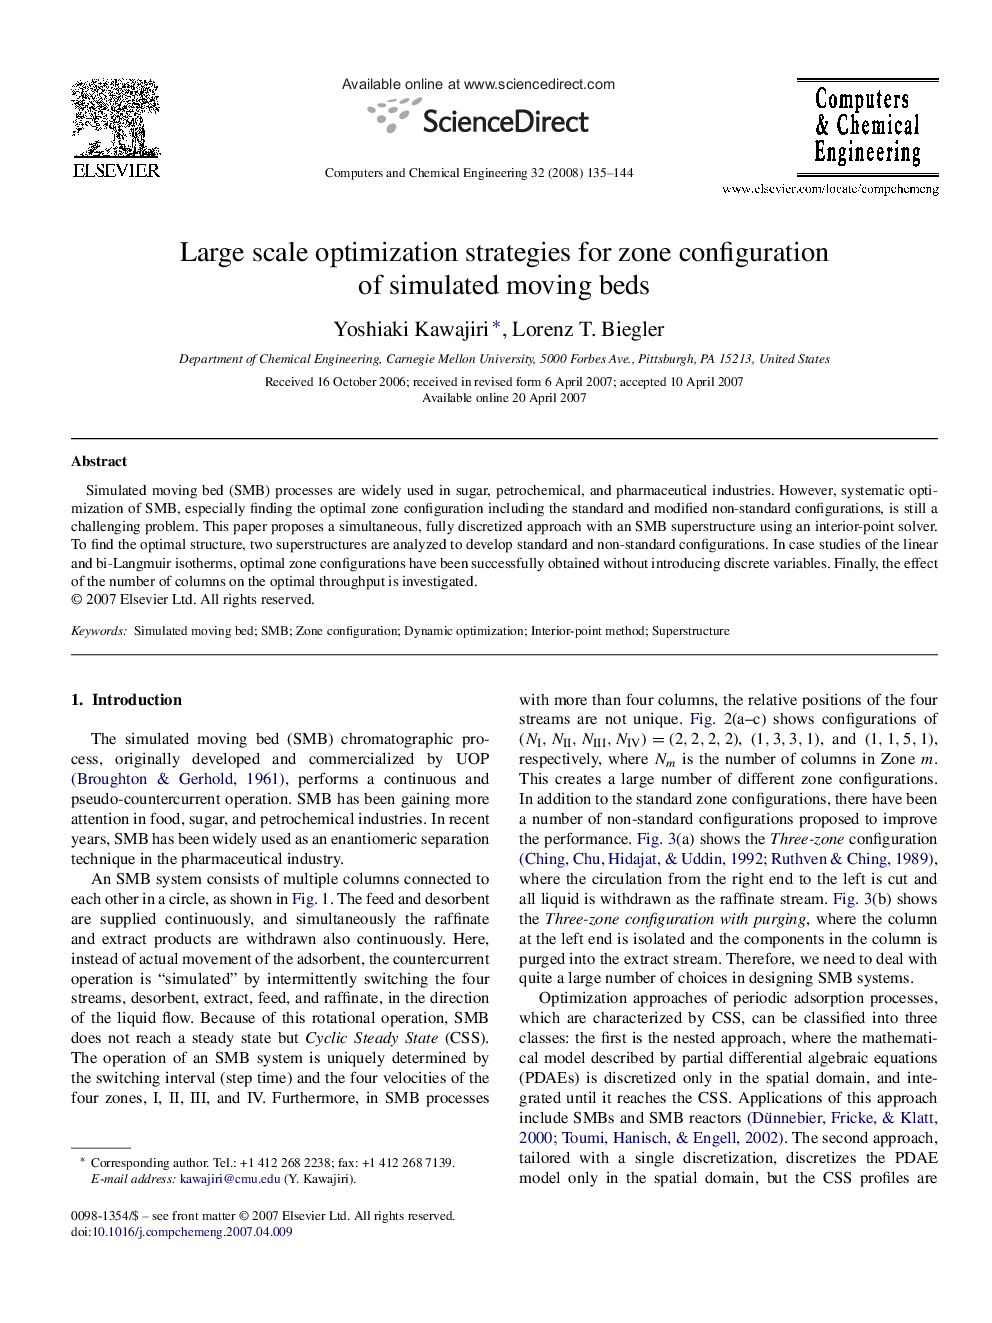 Large scale optimization strategies for zone configuration of simulated moving beds